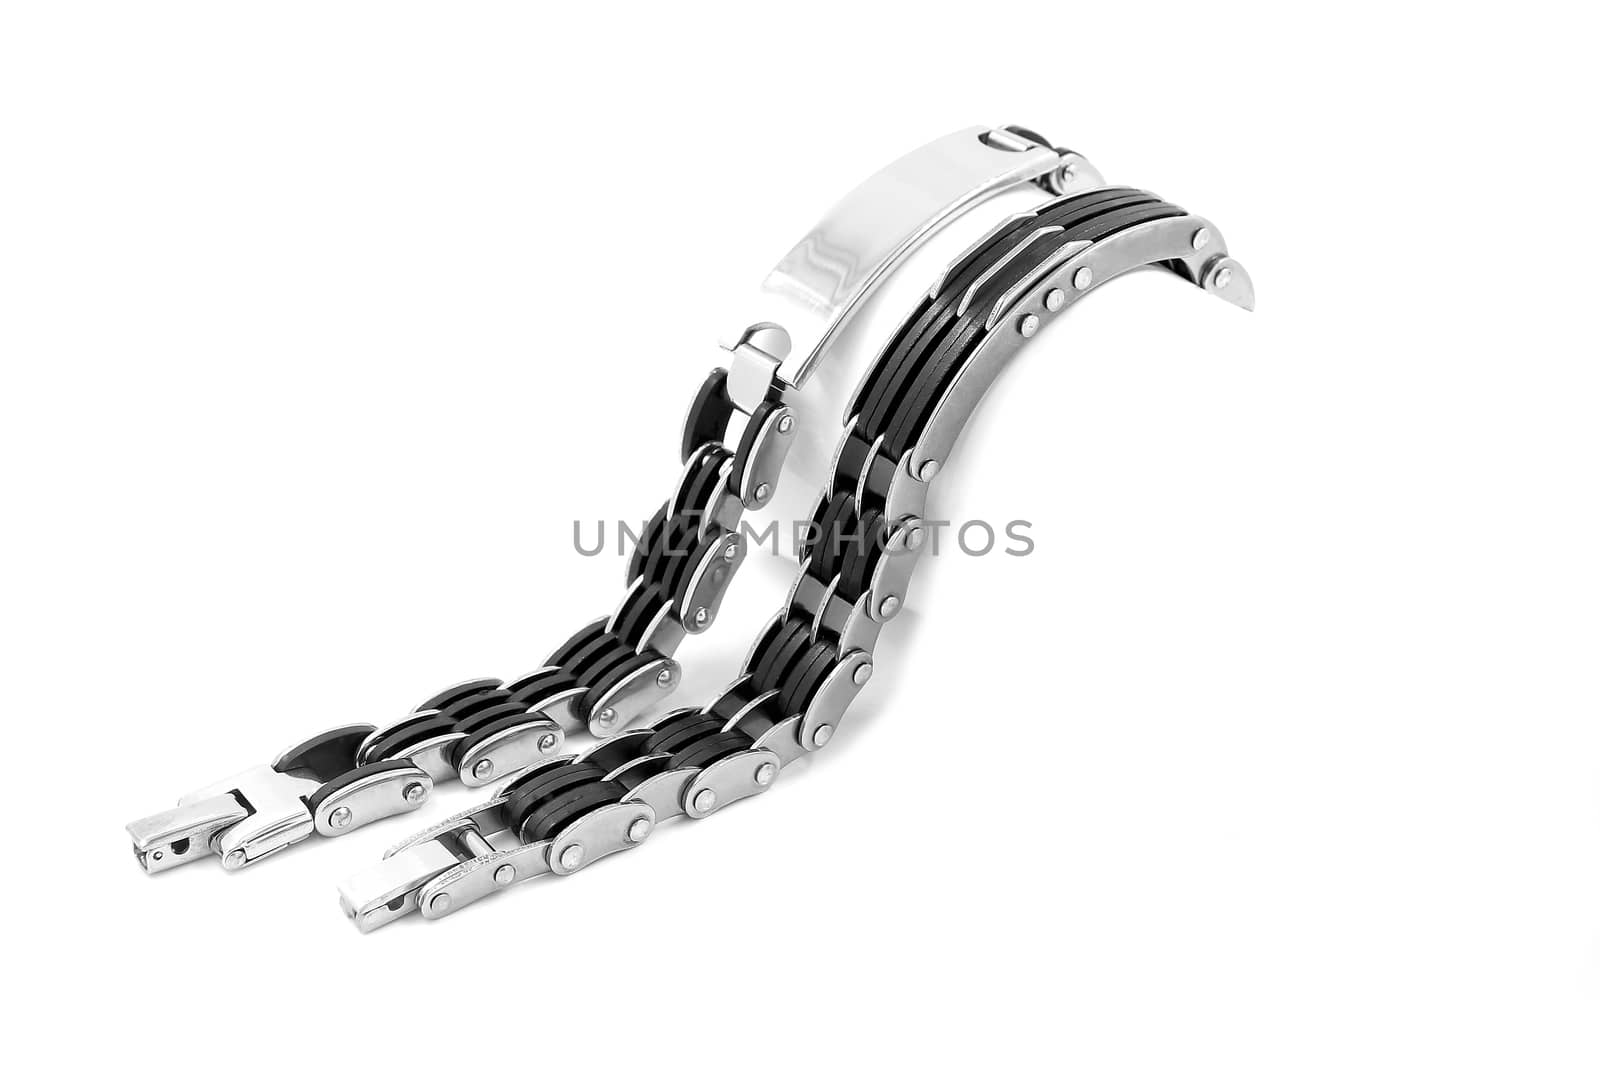 Bracelet, surgical stainless steel. Isolated on white background